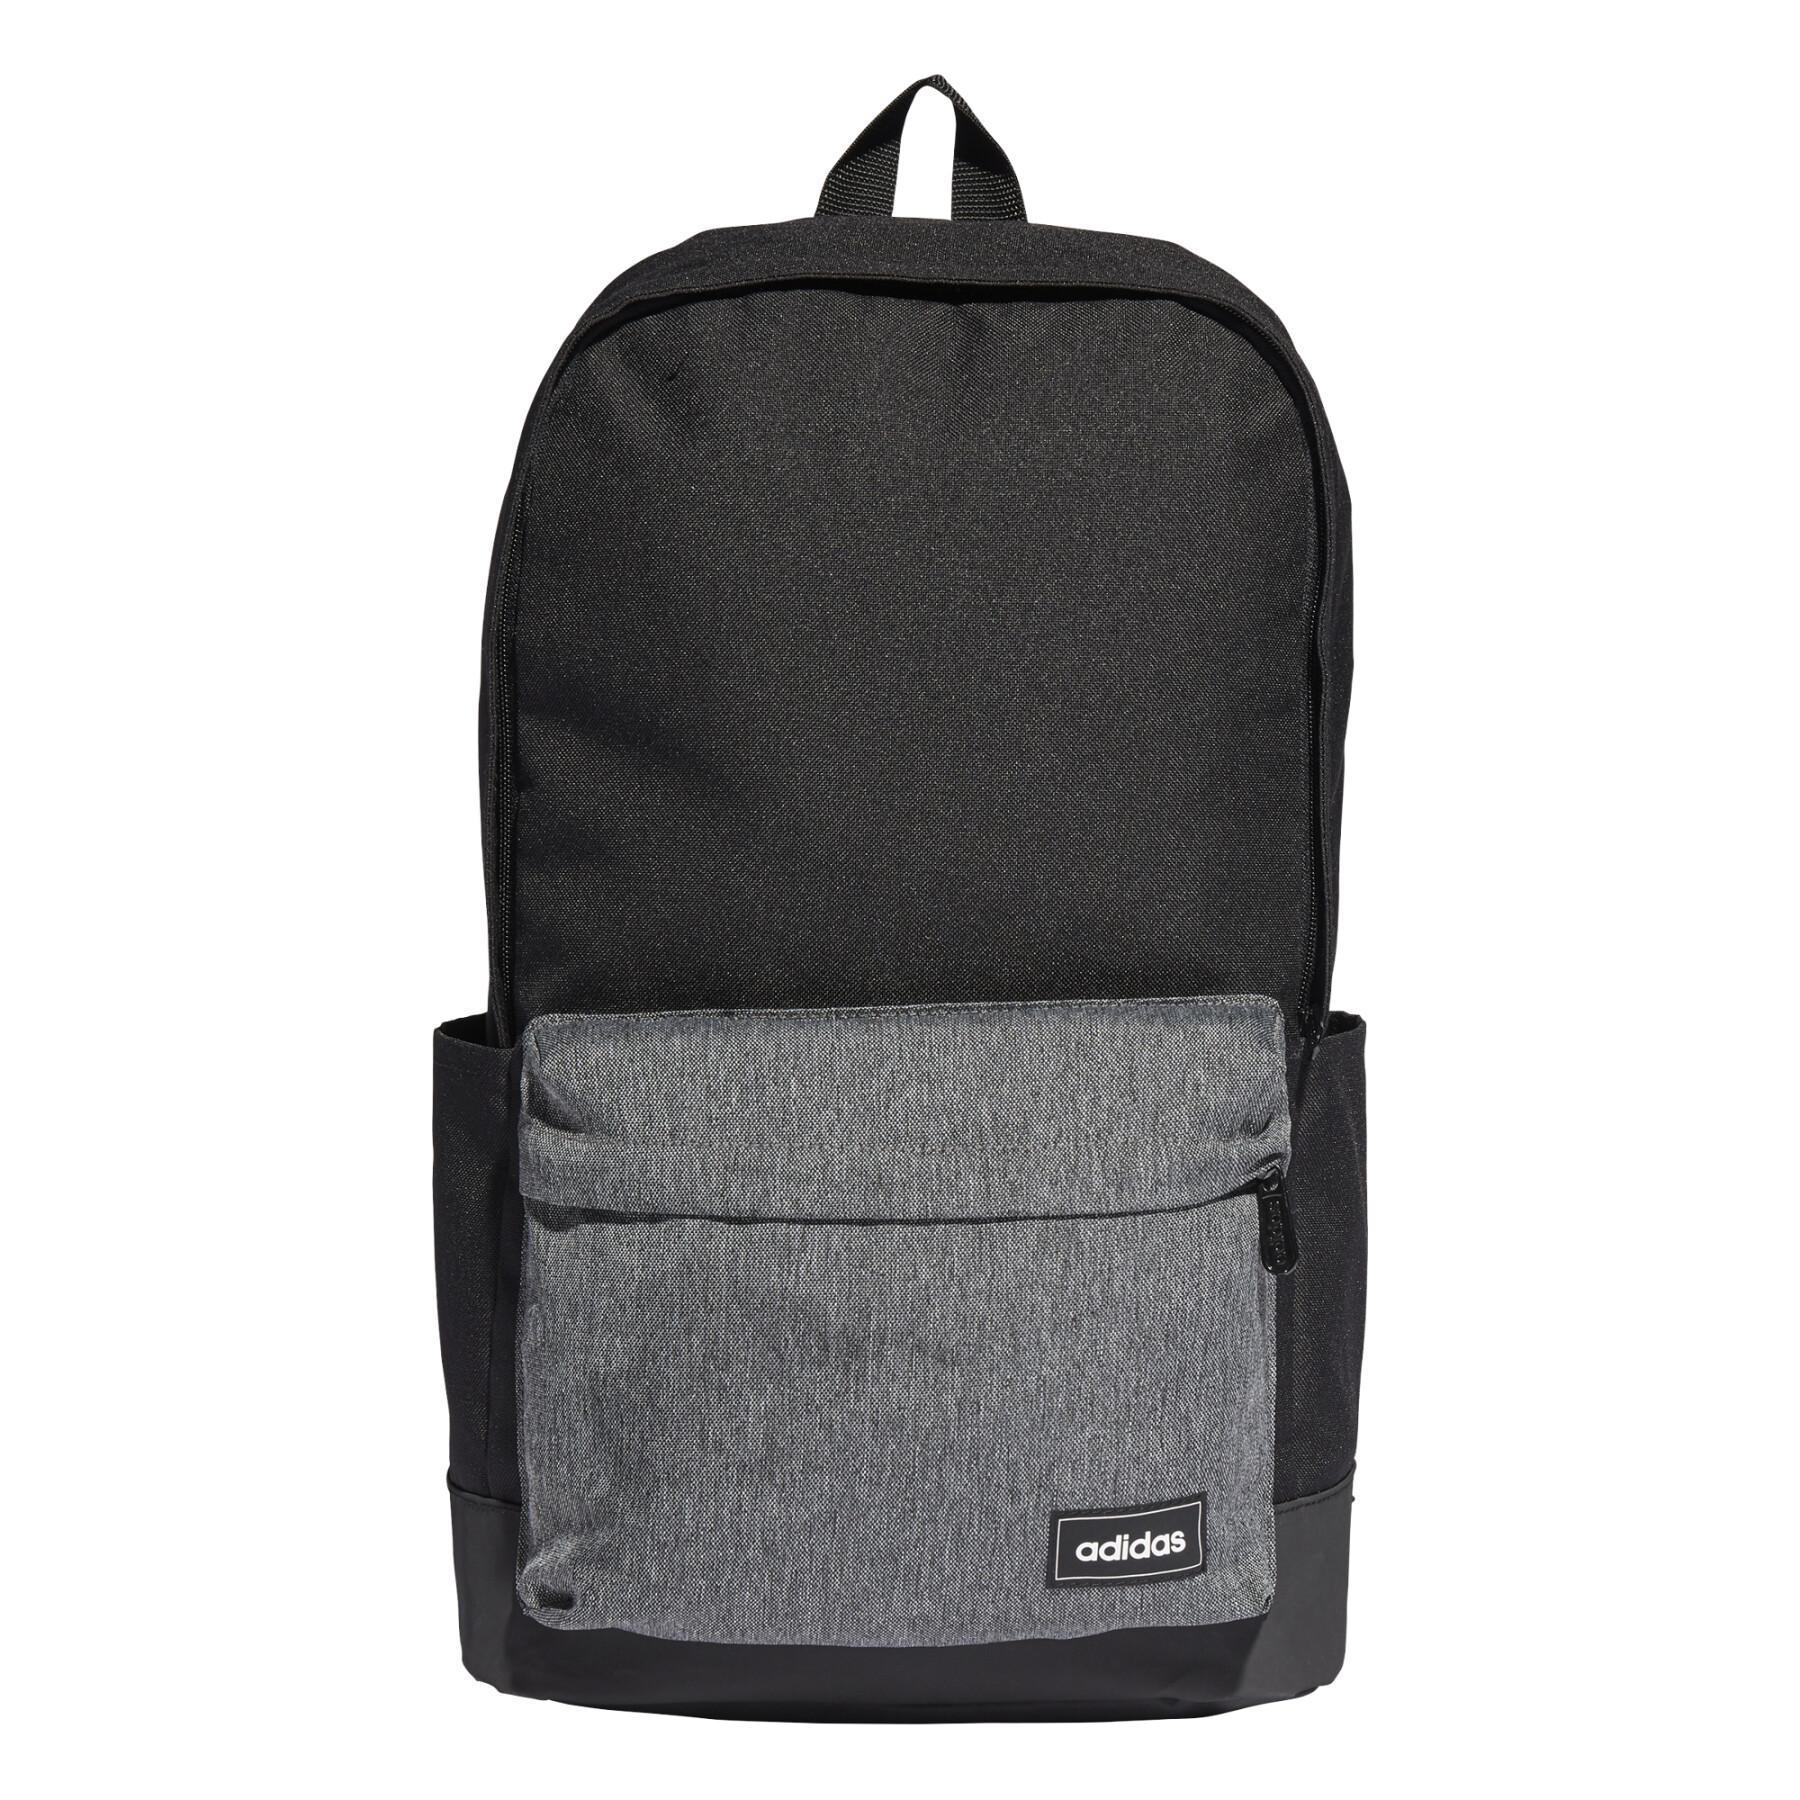 Backpack adidas classic